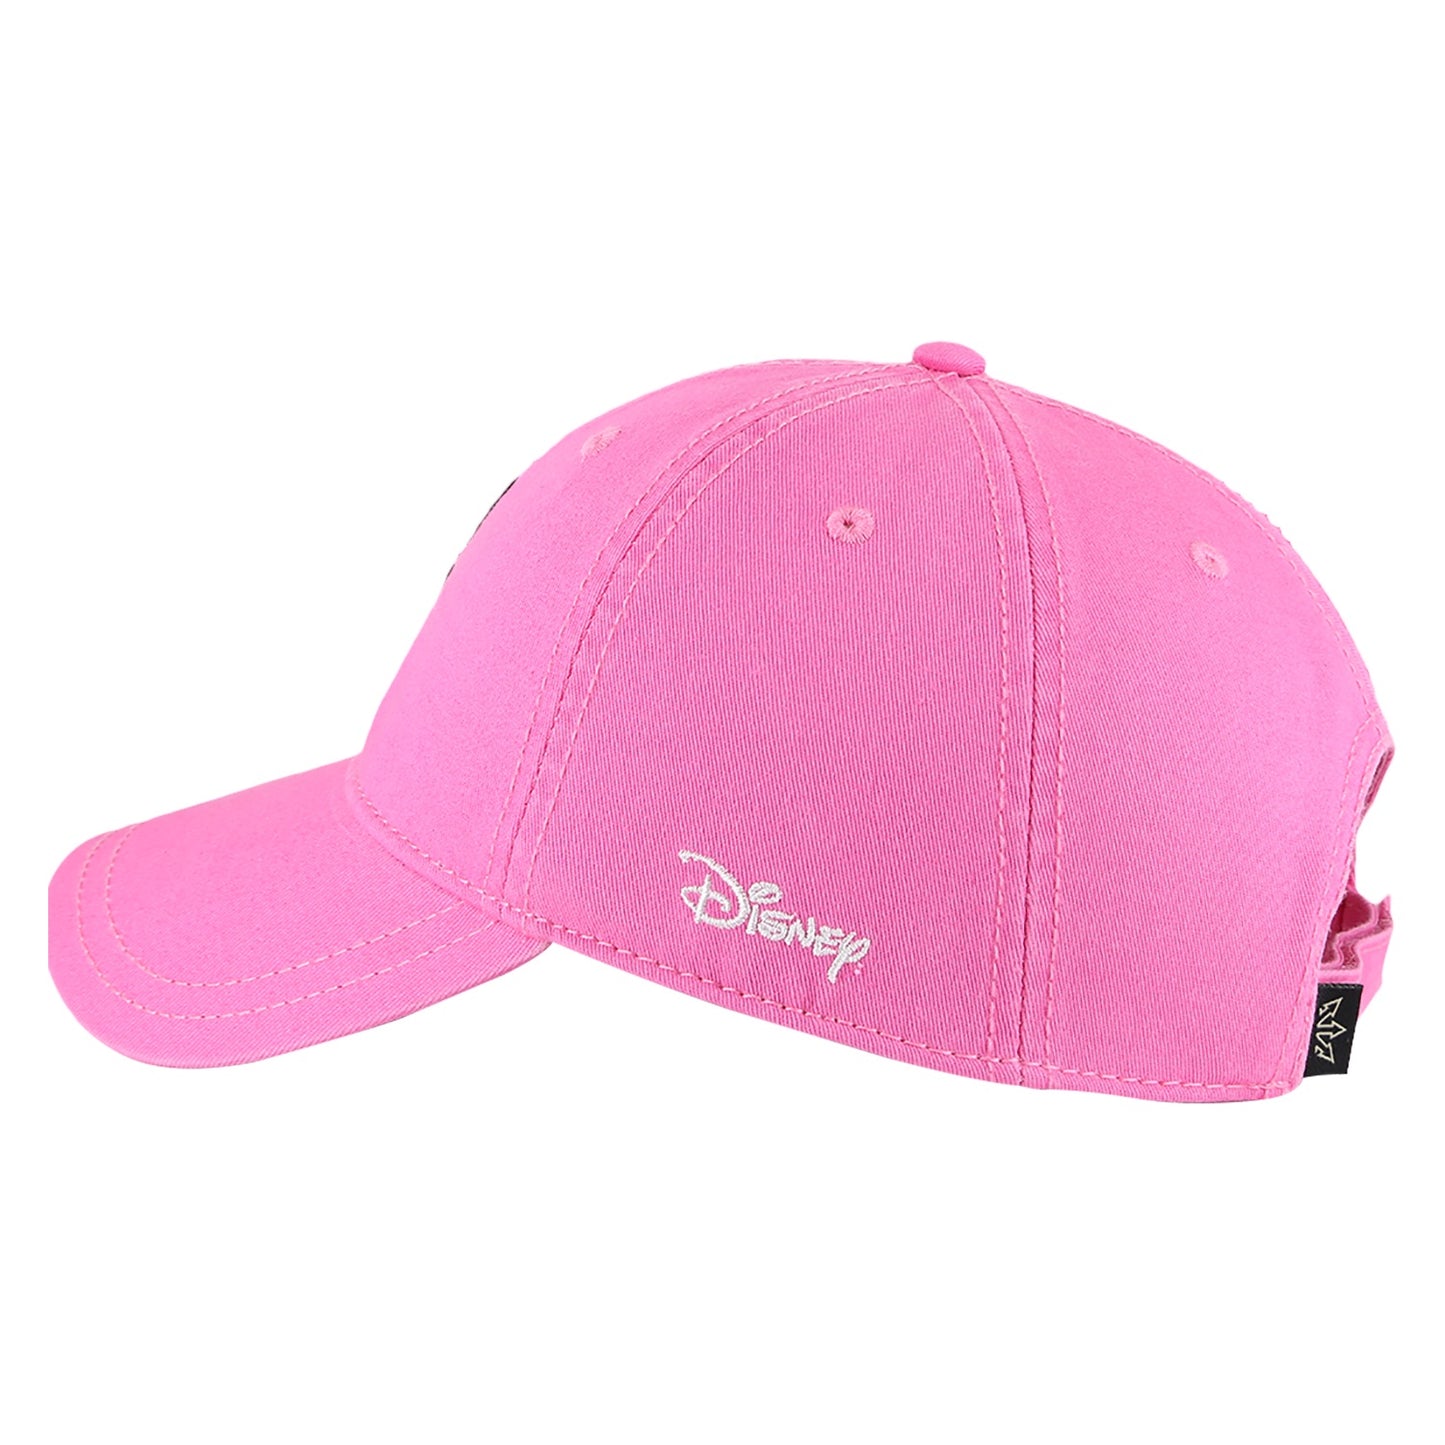 Kids Minnie Mouse Baseball Cap in Red